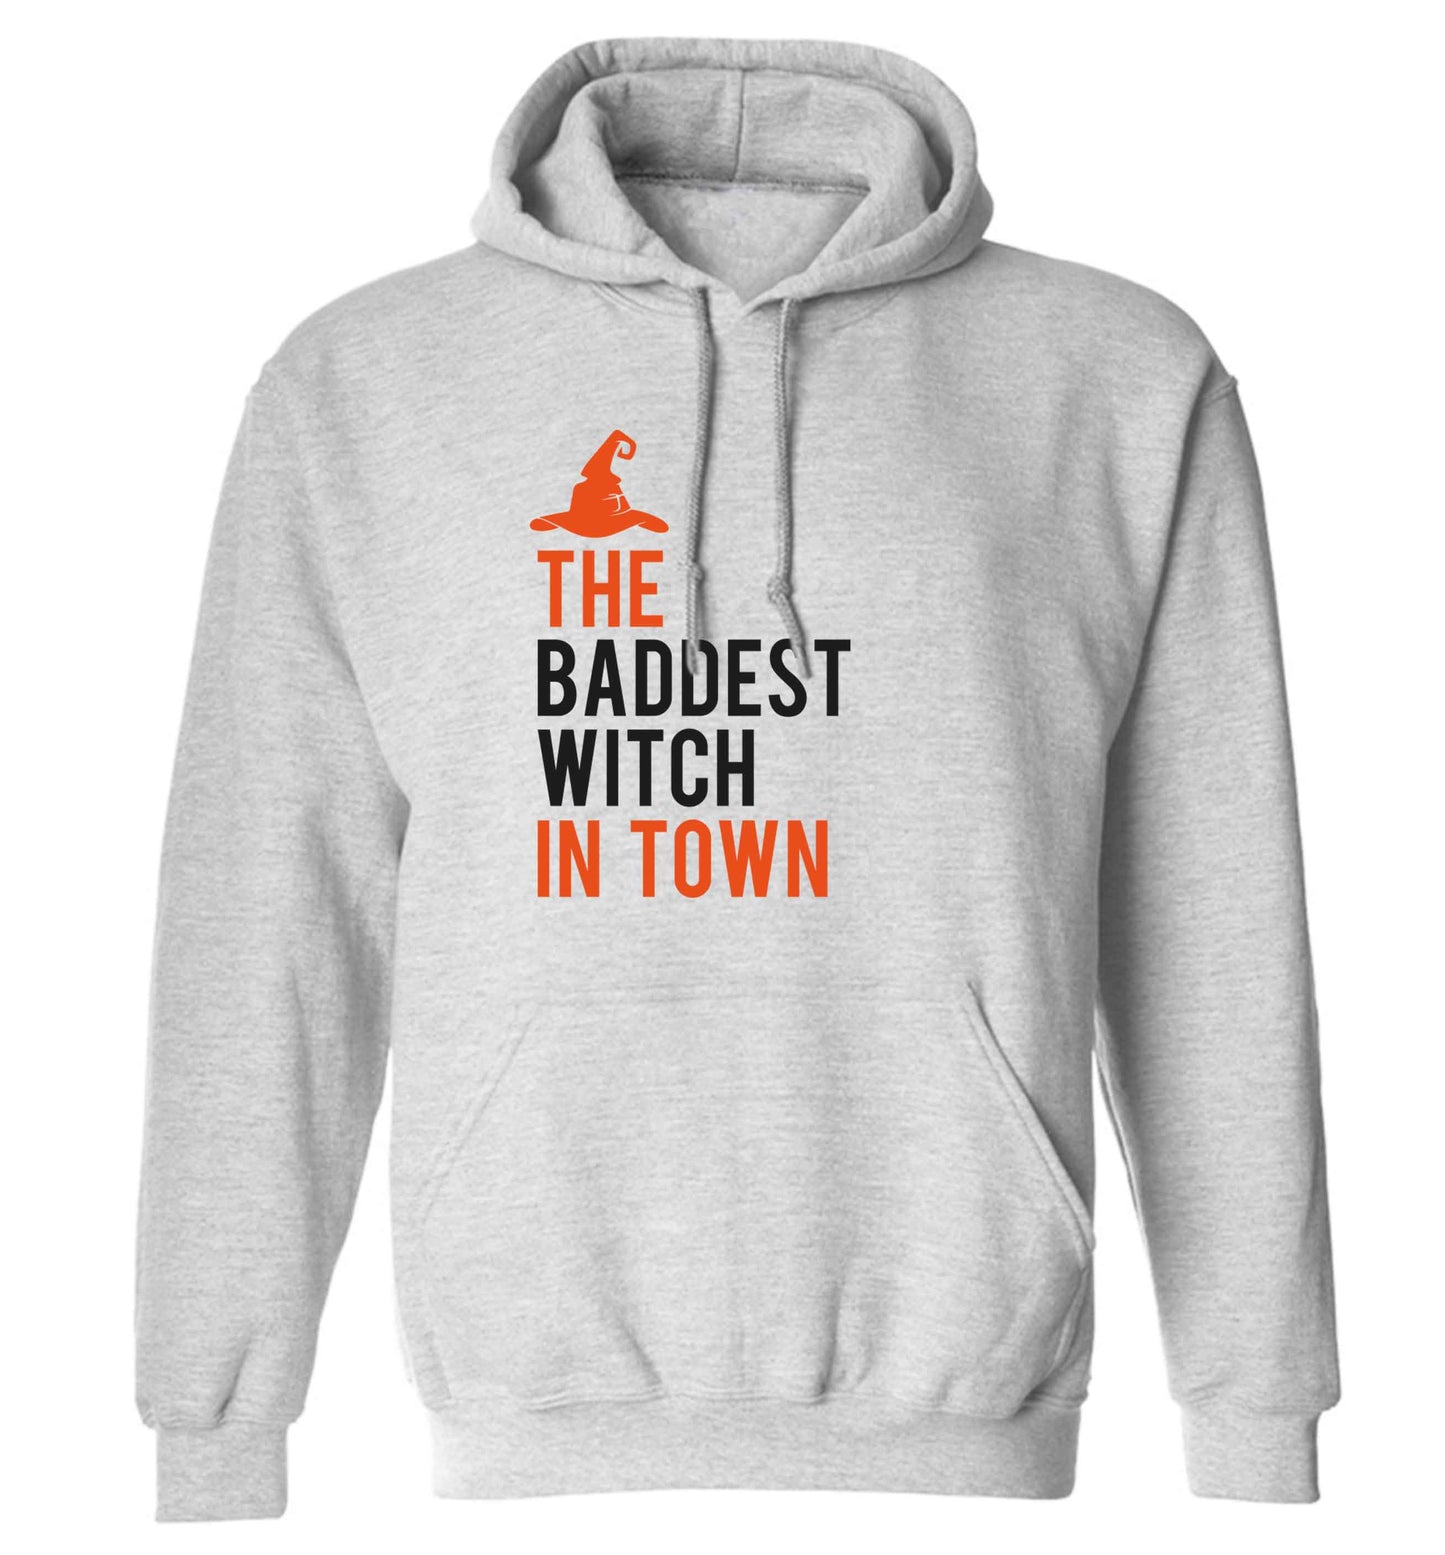 Badest witch in town adults unisex grey hoodie 2XL